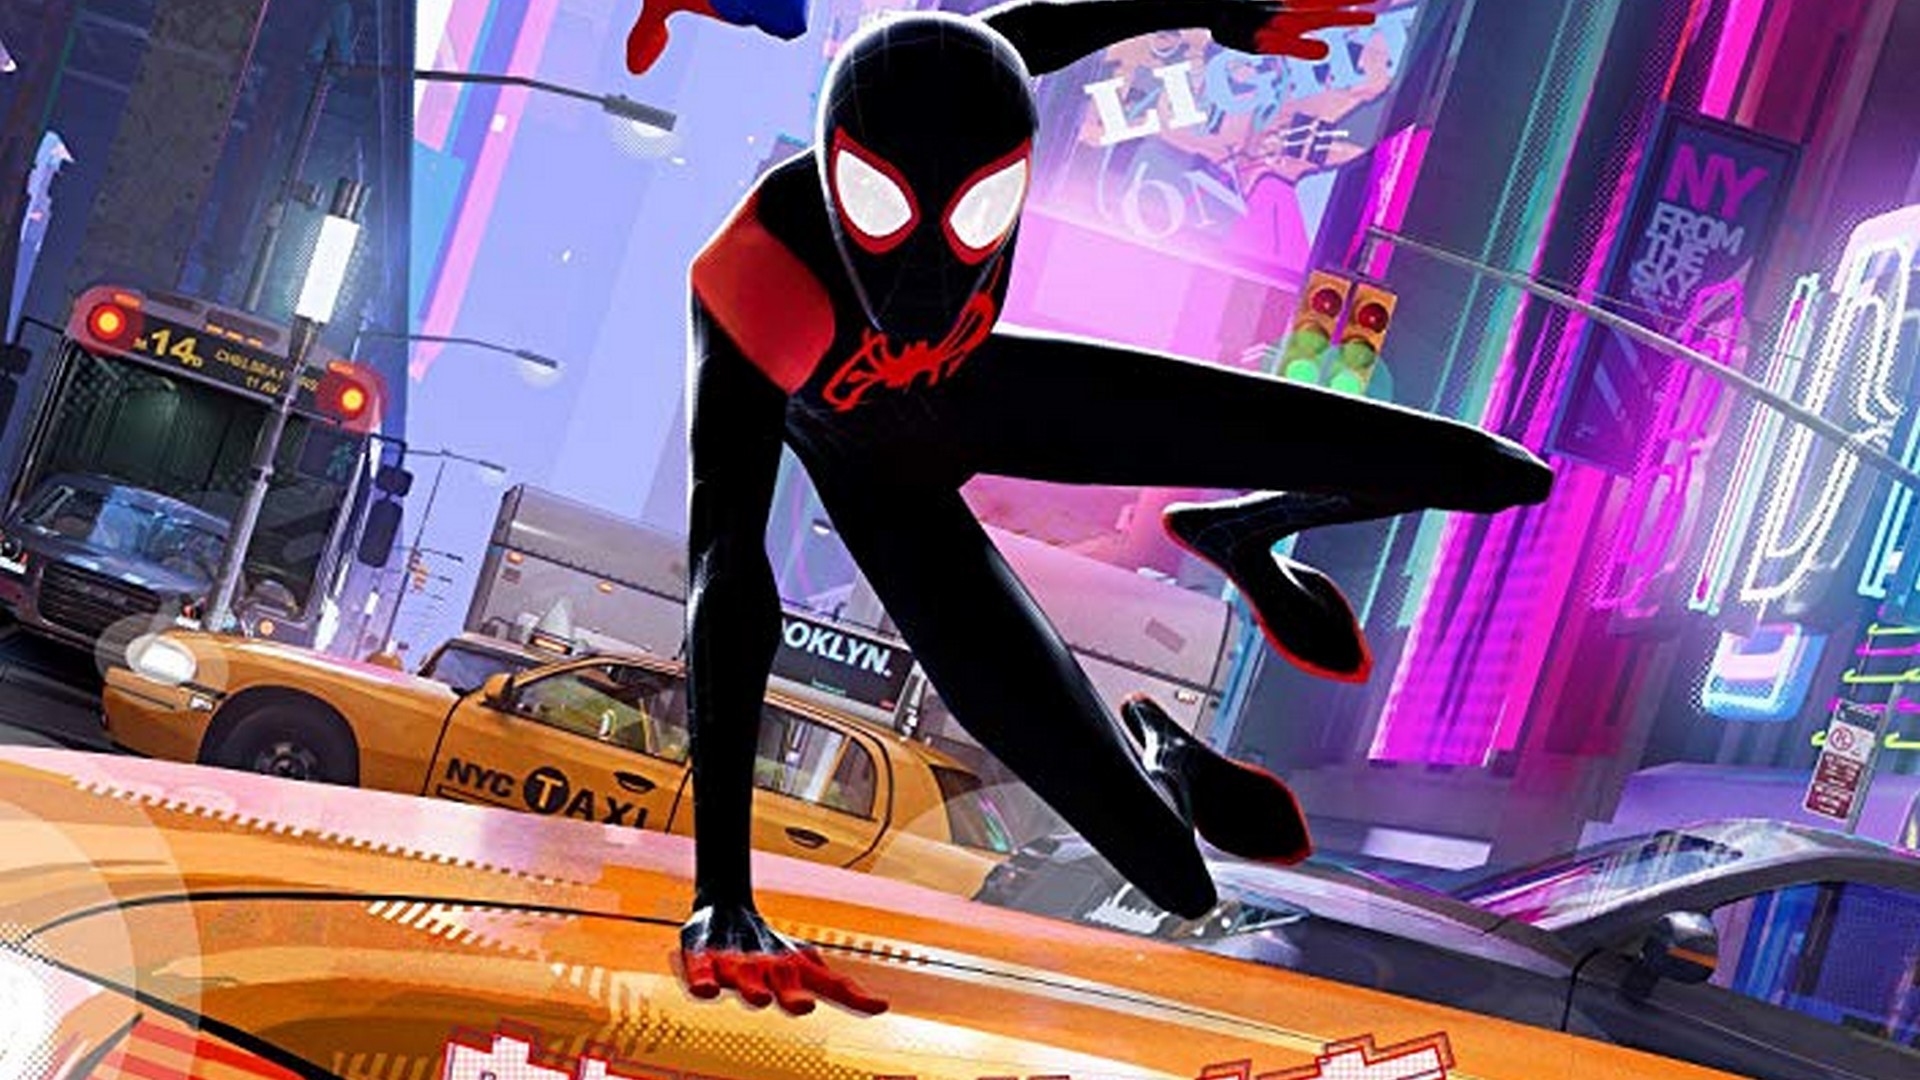 Spider-Man Into the Spider-Verse Wallpaper HD With Resolution 1920X1080 pixel. You can make this wallpaper for your Desktop Computer Backgrounds, Mac Wallpapers, Android Lock screen or iPhone Screensavers